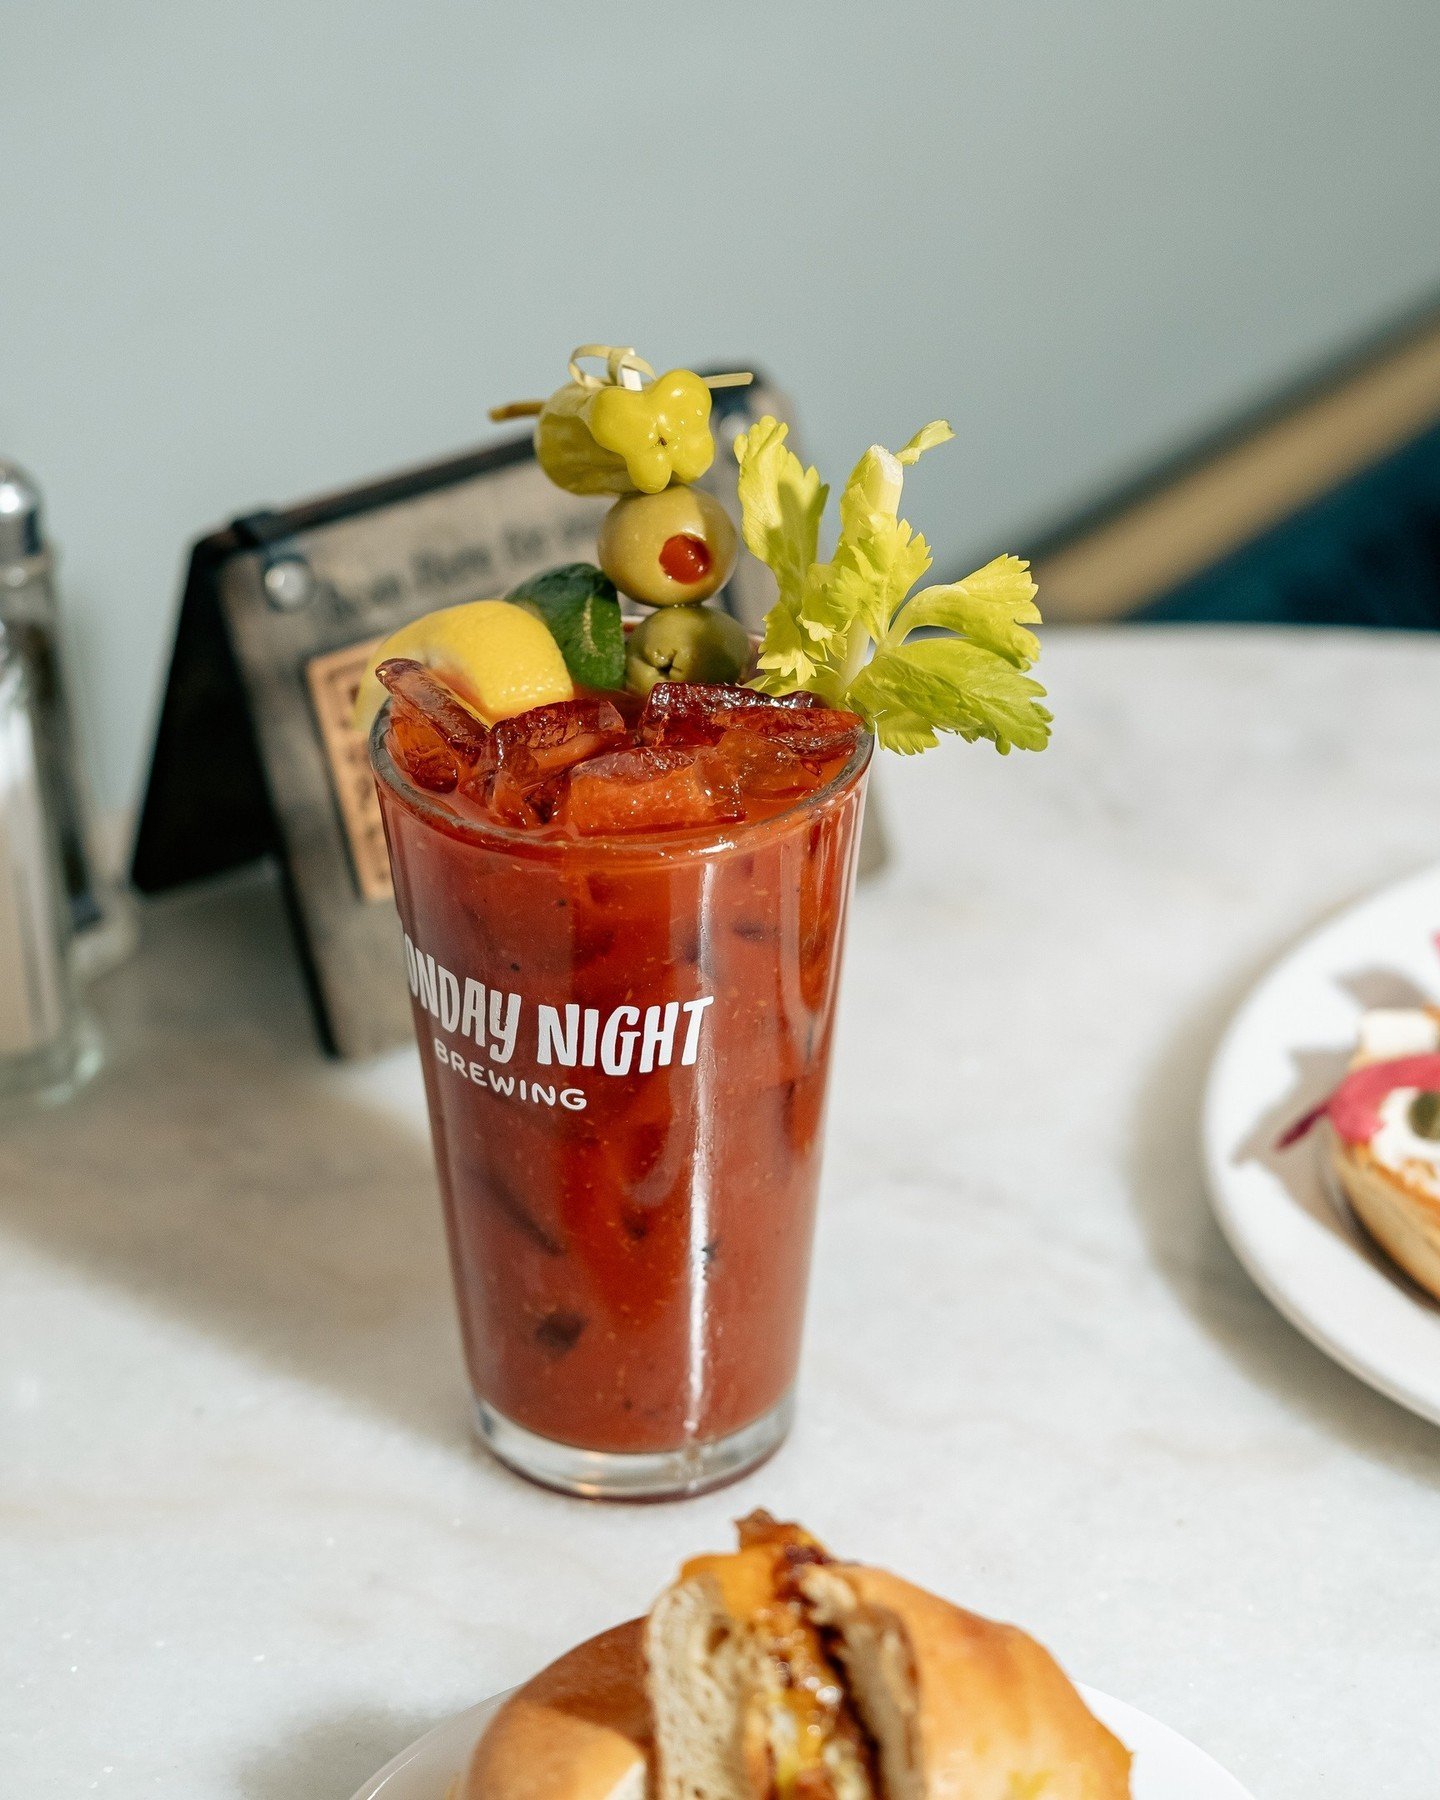 🍹Cheers to lazy mornings and spicy adventures! 🌶️🍅 Weekends were made for sipping on zesty Bloody Marys that awaken your taste buds and kickstart your weekend! 🌞💥 Who's ready to join the brunch club and indulge in this classic cocktail? Tag your